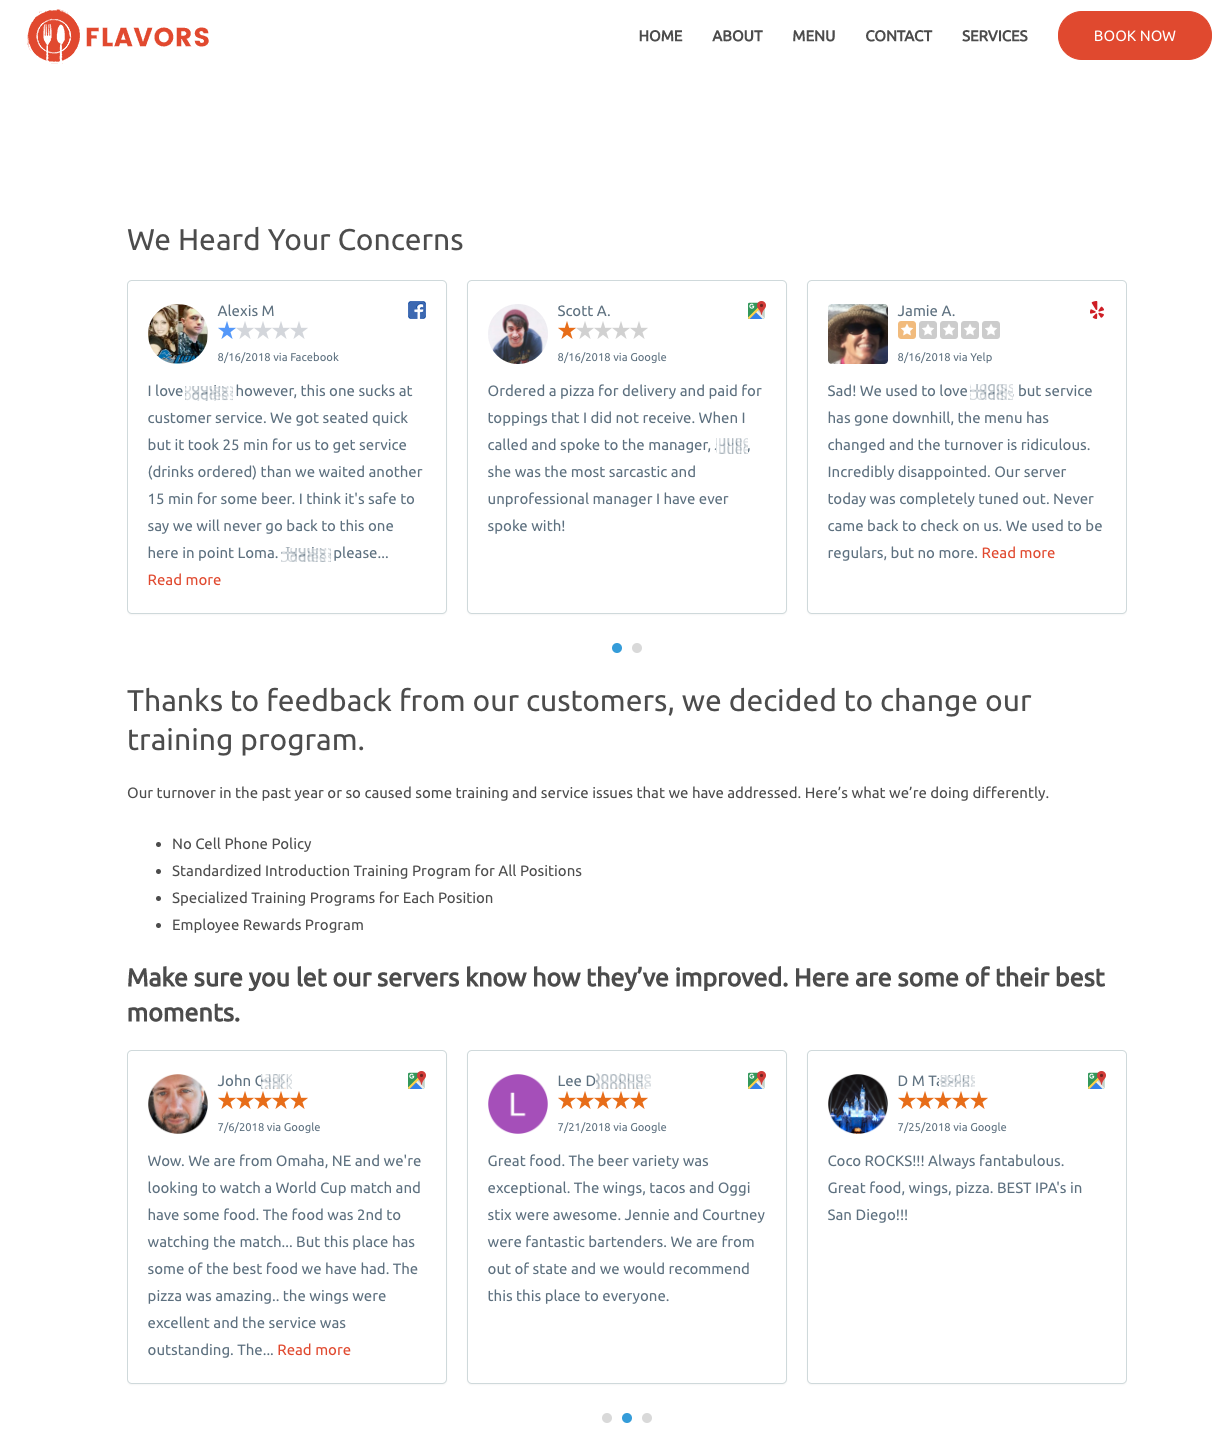 We Heard Your Concerns Page filled with negative reviews and a response to them.